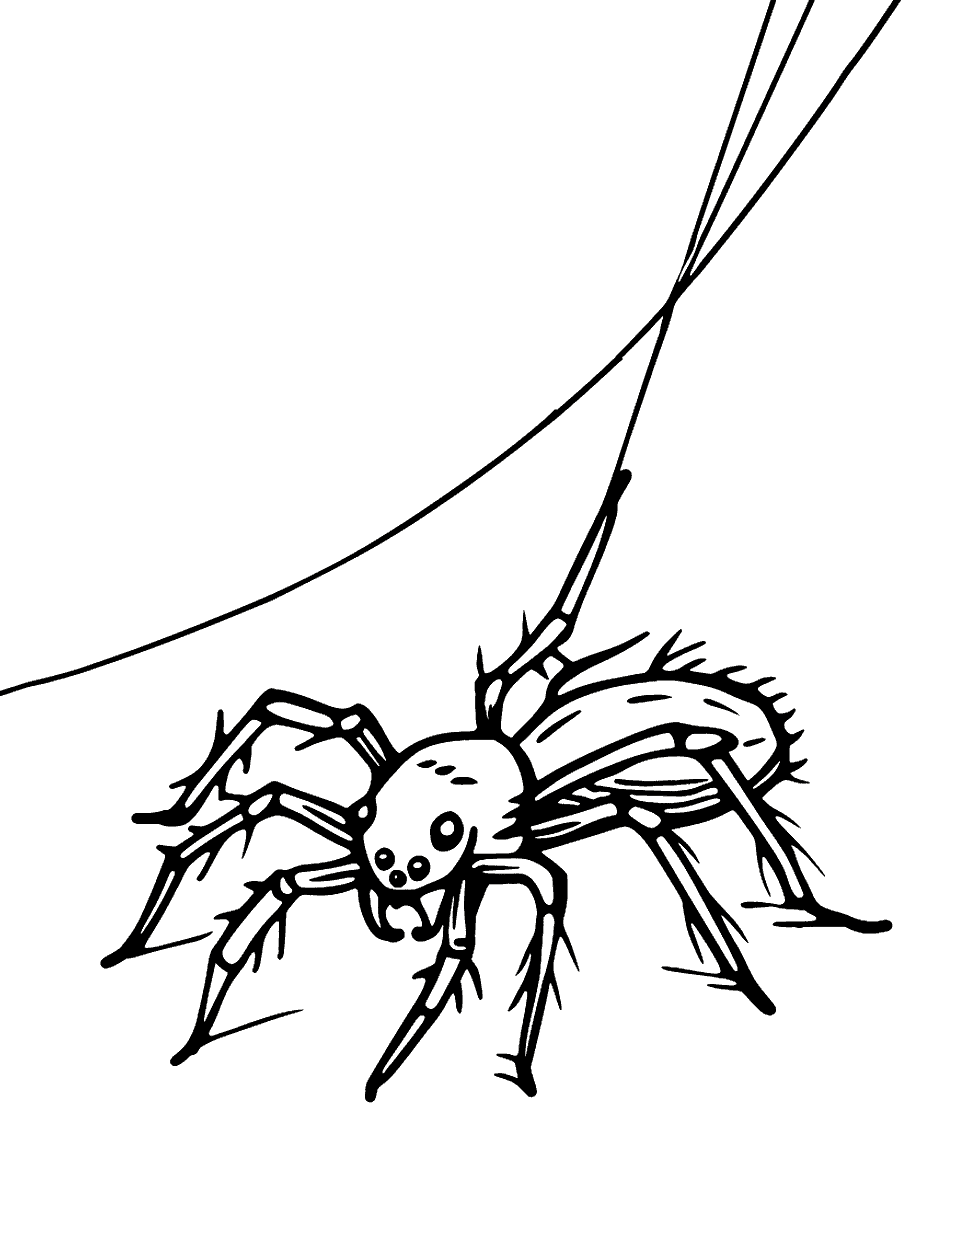 Spider on Its Silk Thread Insect Coloring Page - A spider descending gracefully on its silk thread.